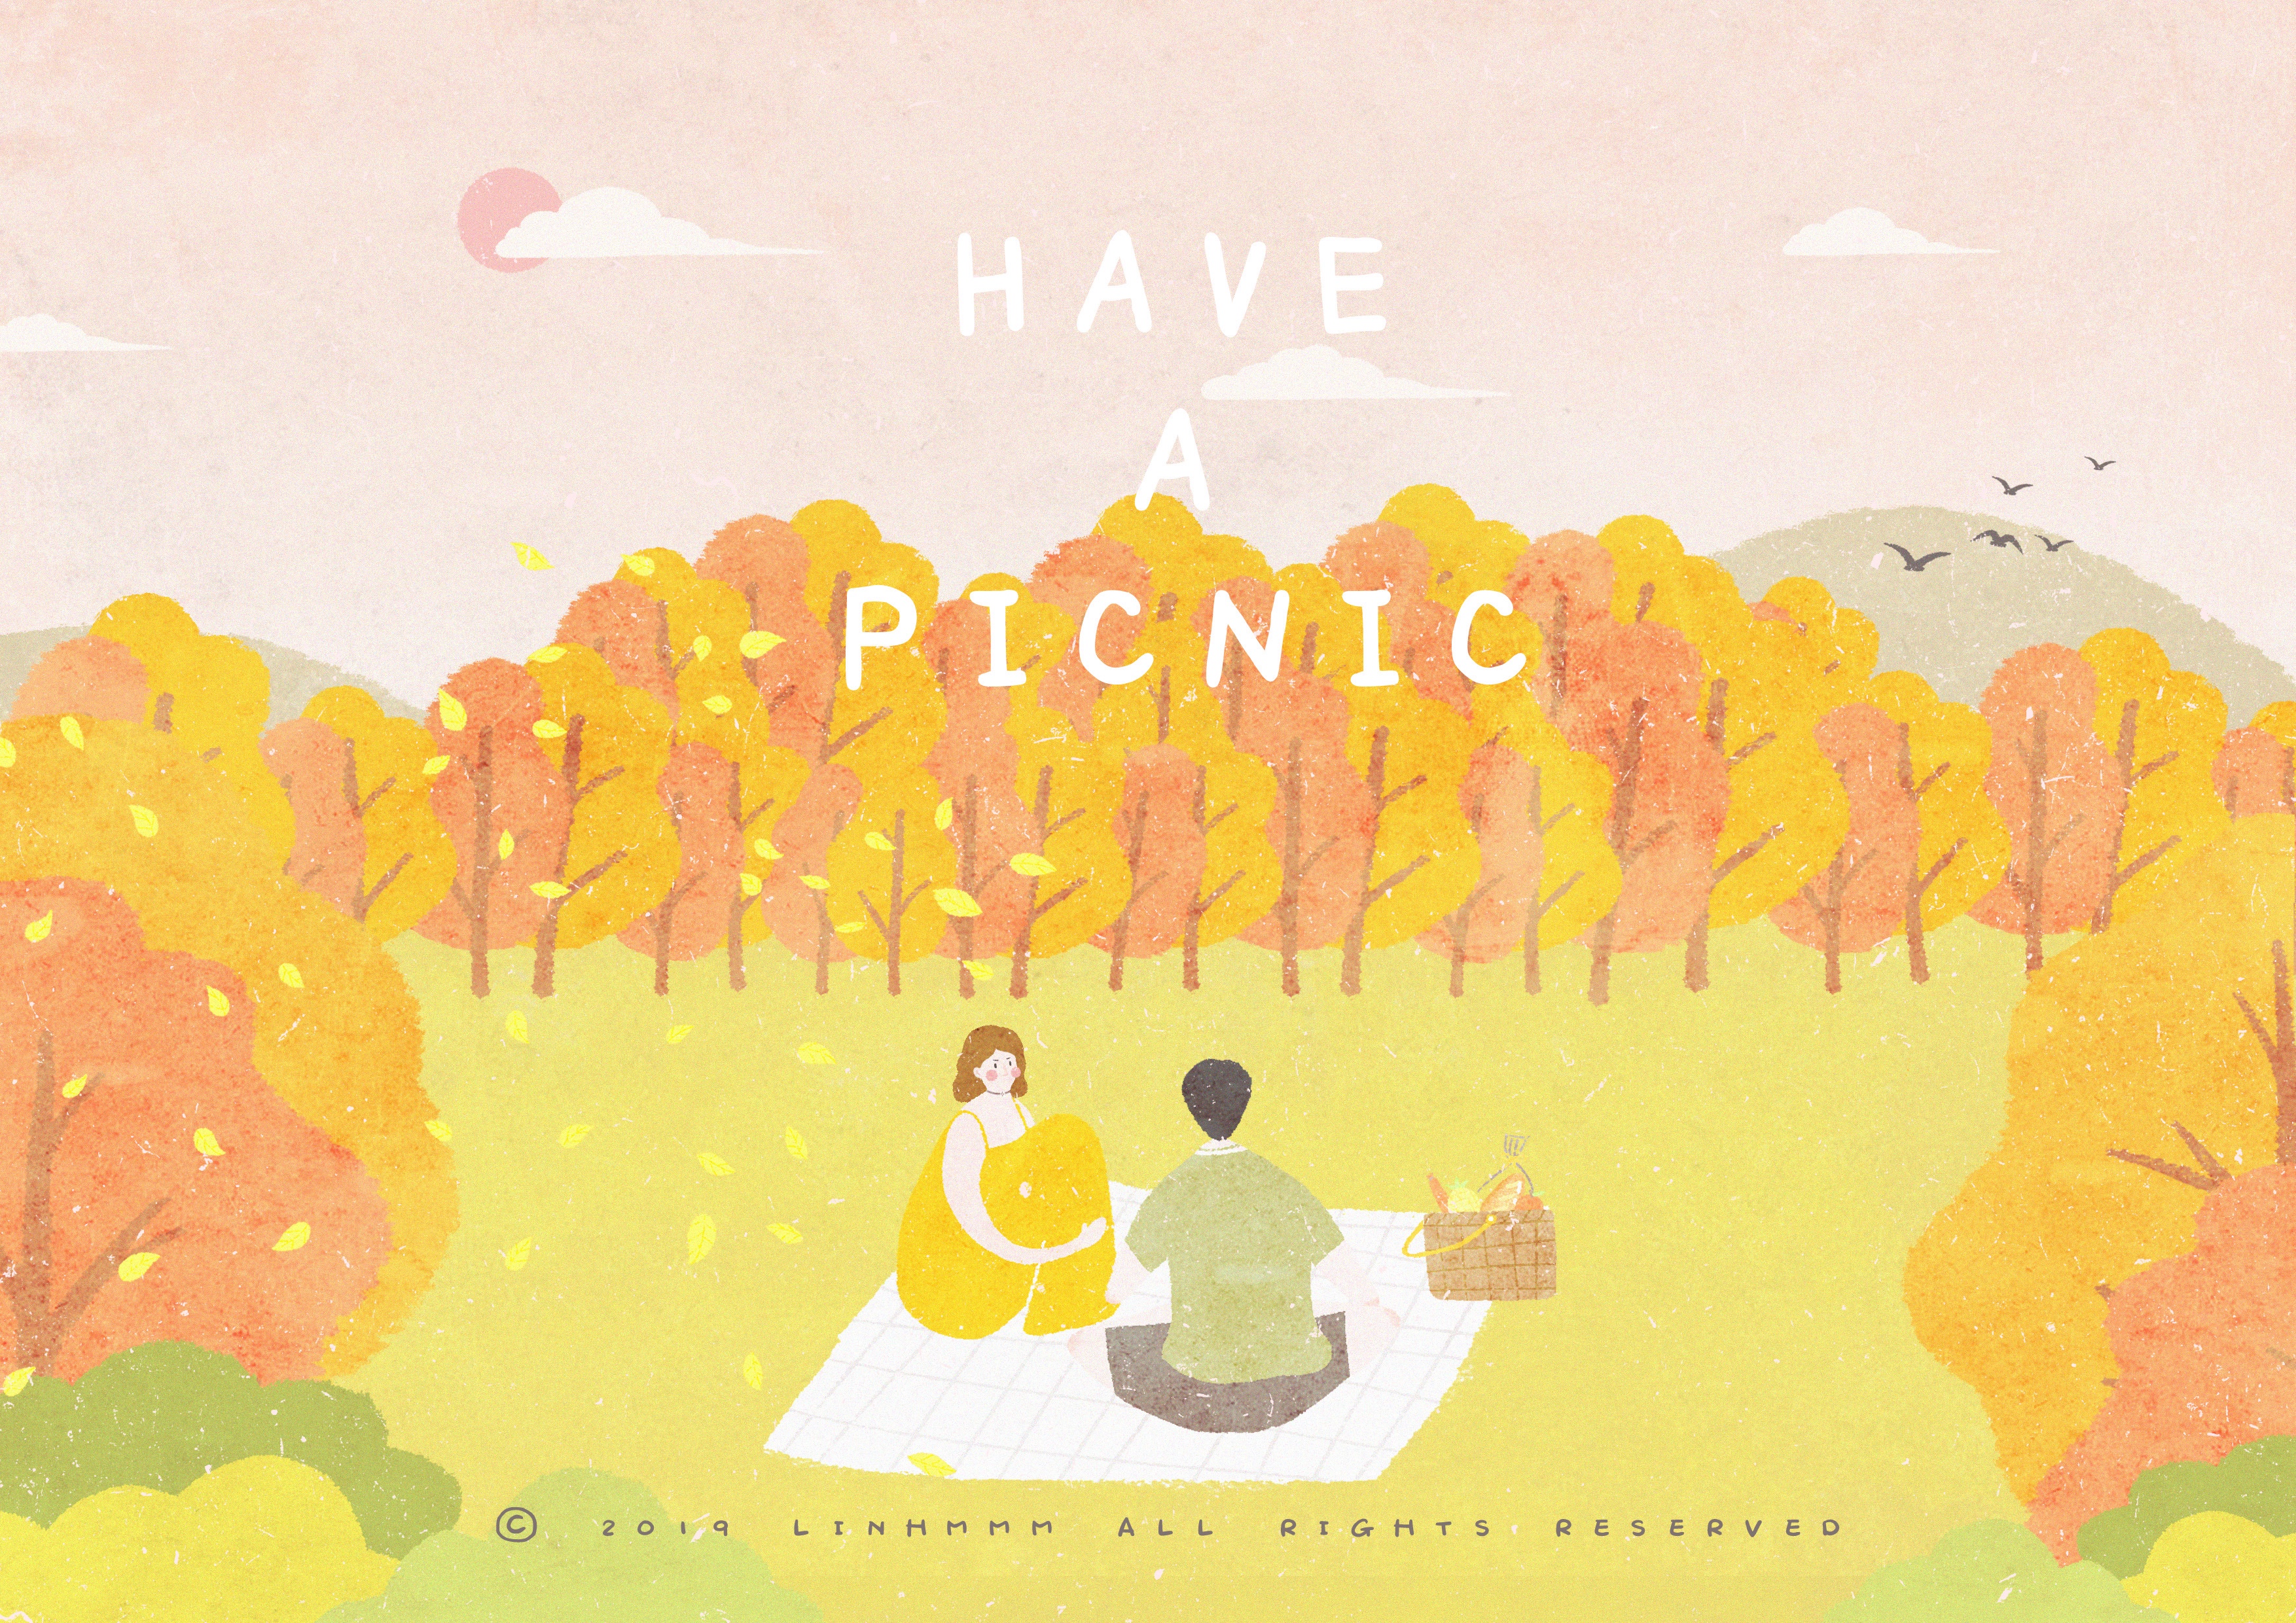 HAVE A PICNIC